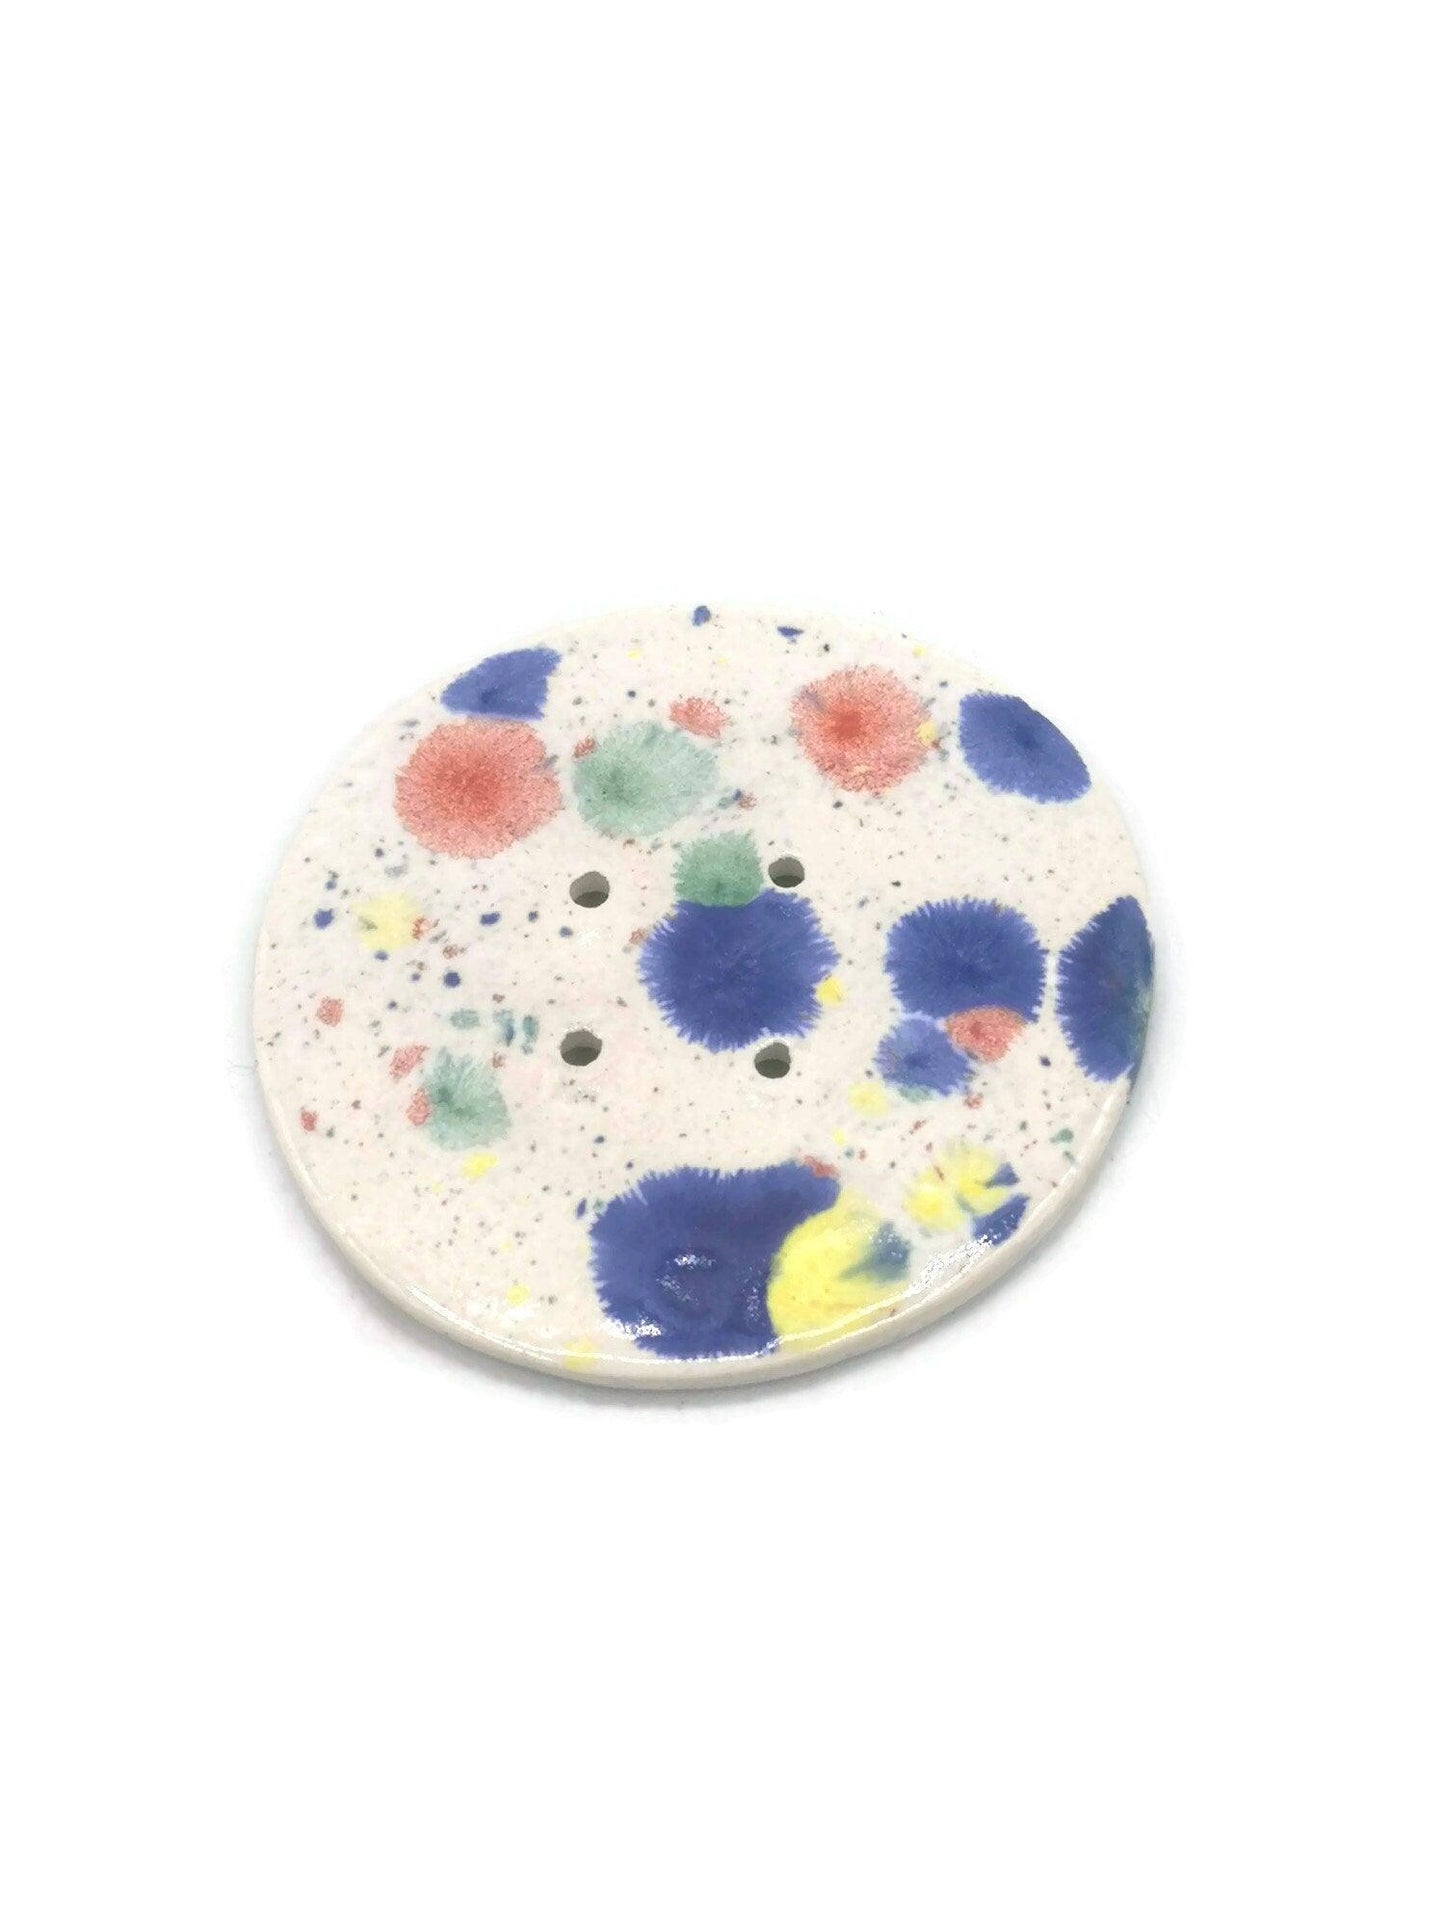 1Pc 65mm Colorful Giant Sewing Buttons, Jumbo Confetti Decorative Novelty Extra Large Buttons for Crafts, Handmade Ceramic Coat Button - Ceramica Ana Rafael